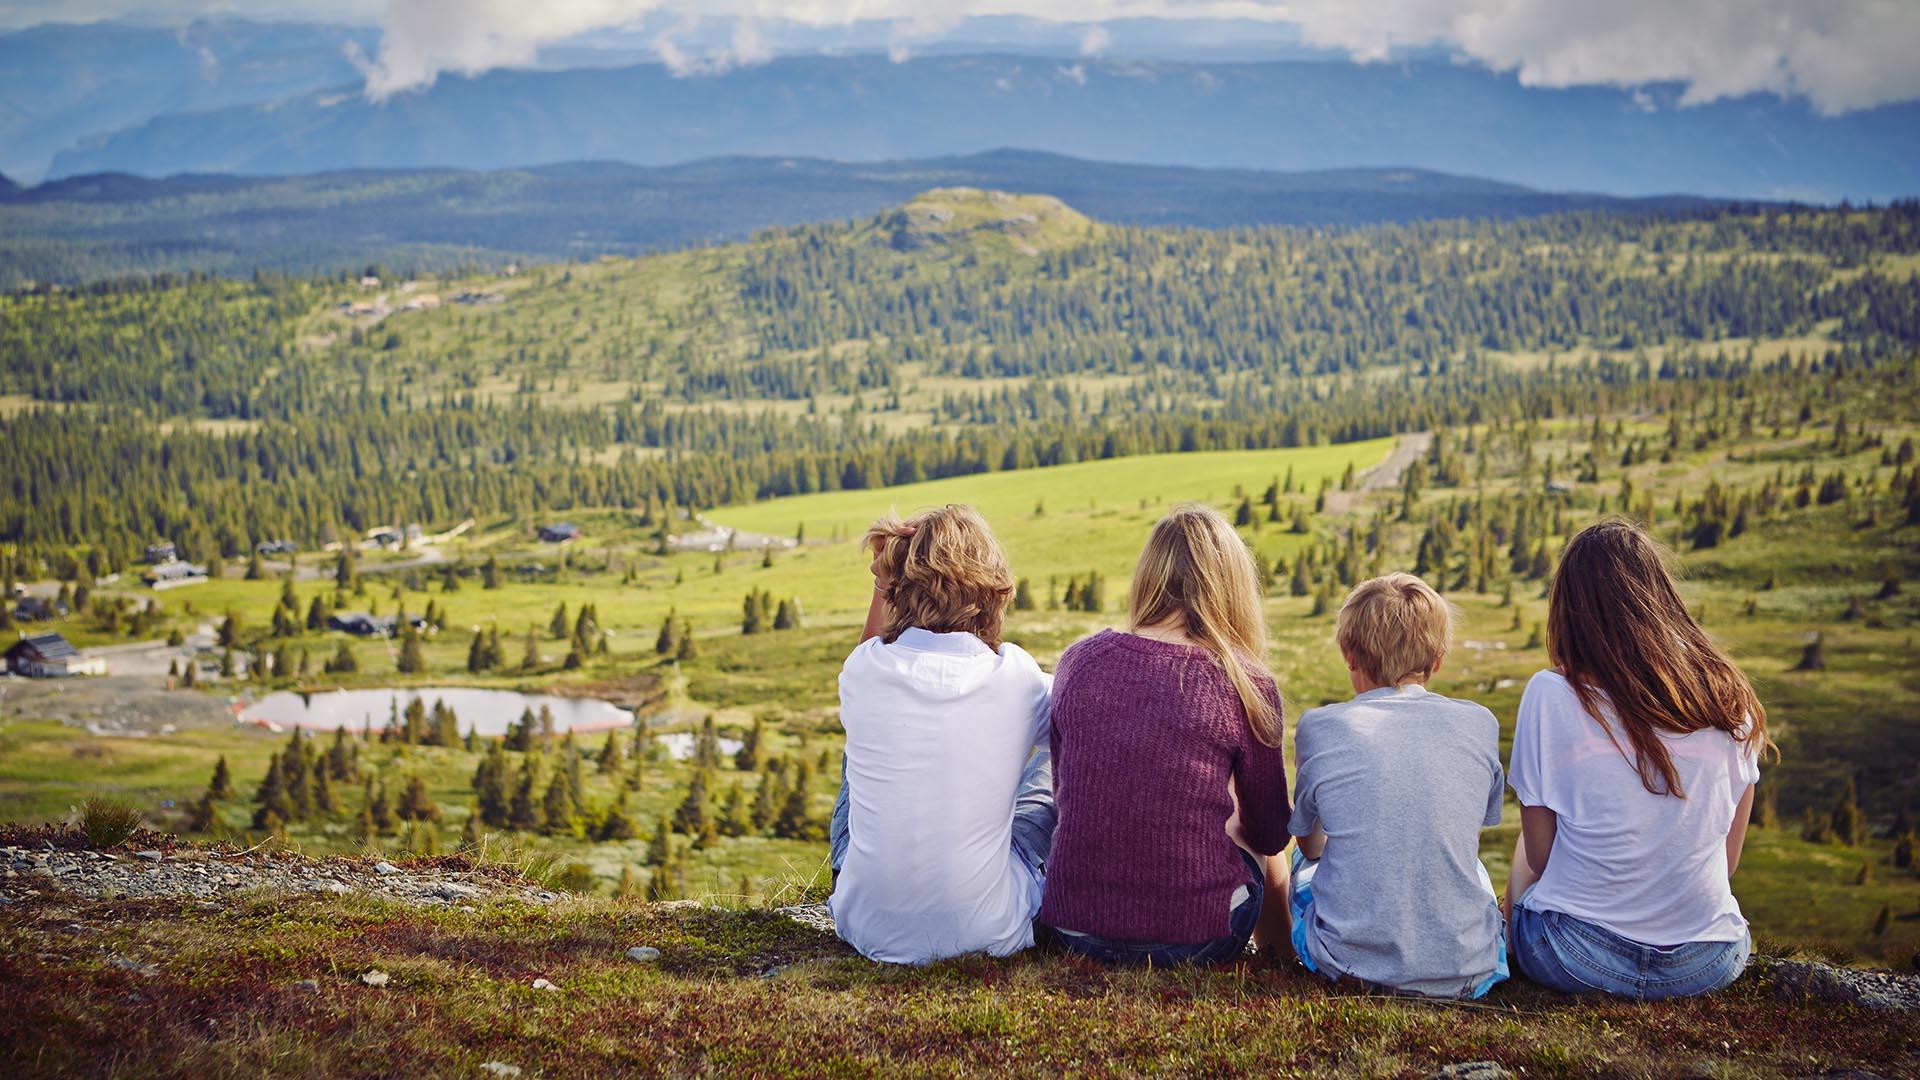 Four ladies sit on a hill facing away from the photographer, overlooking open low mountain terrain with pastures and some spruce forest.